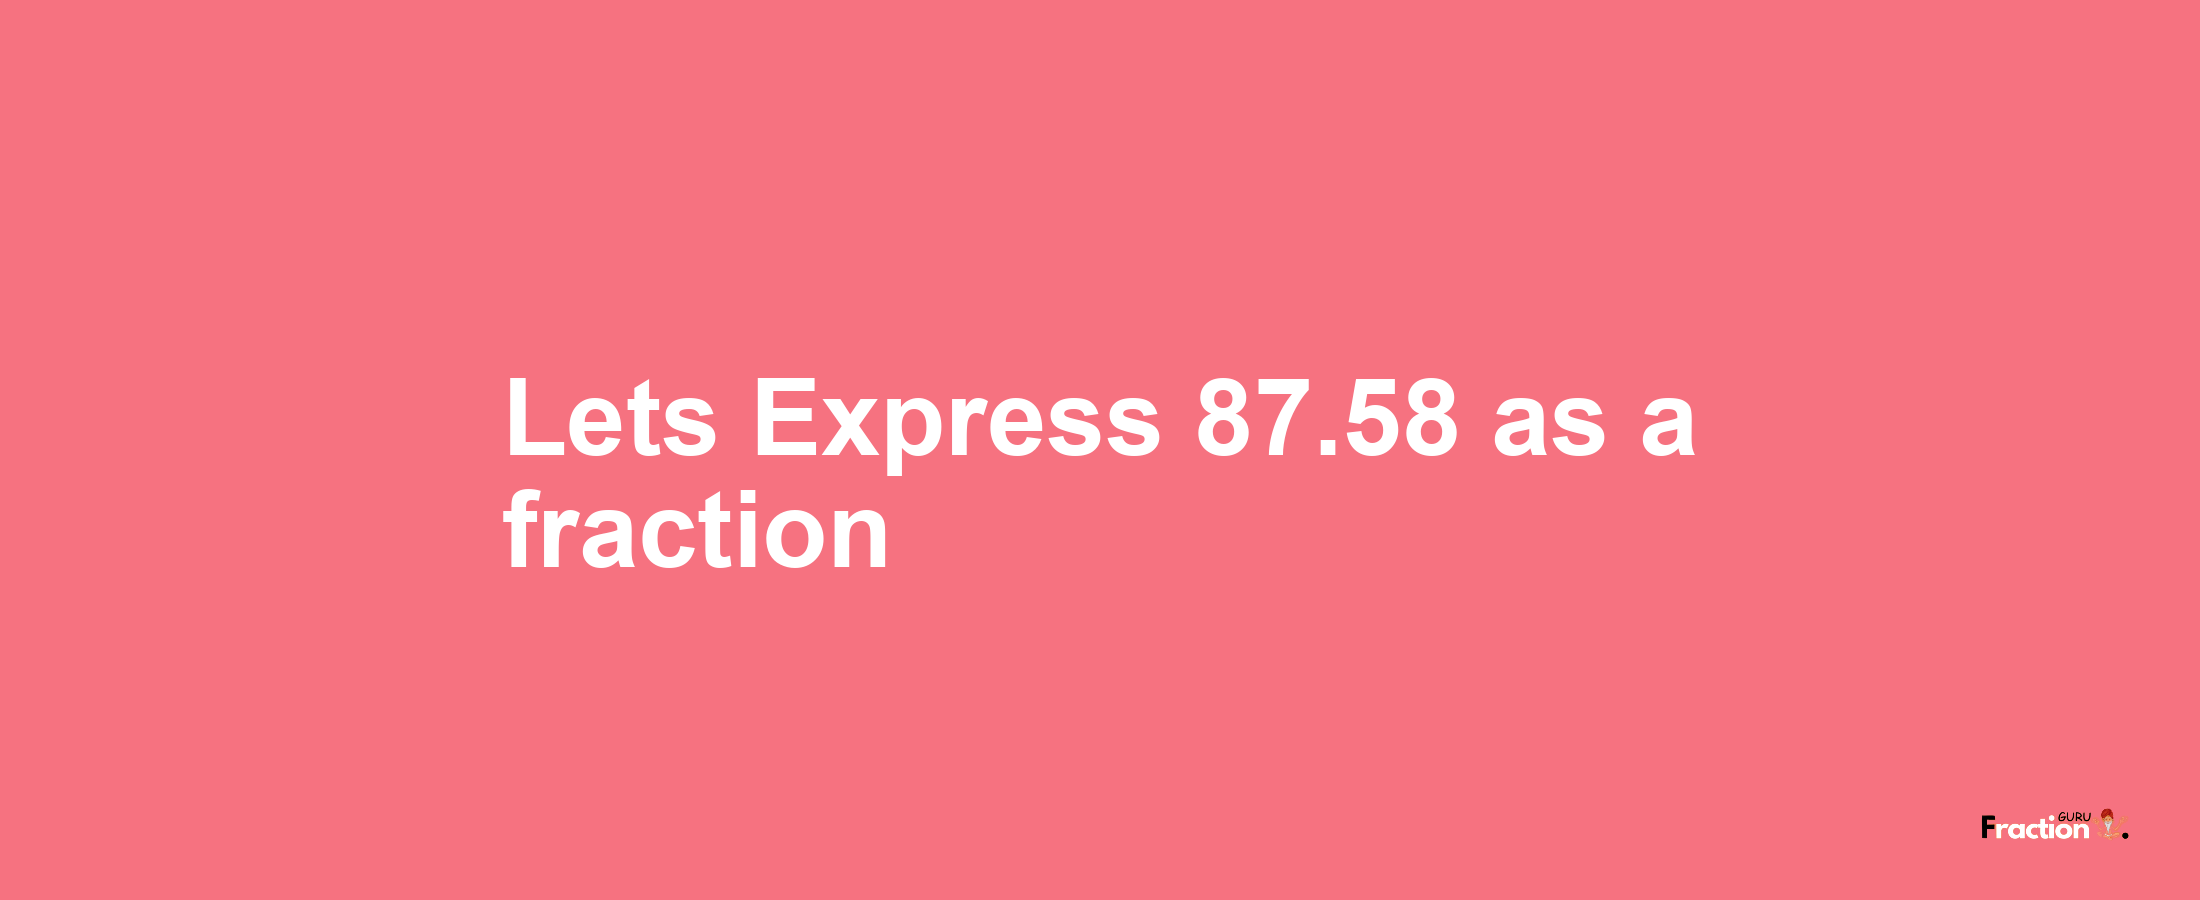 Lets Express 87.58 as afraction